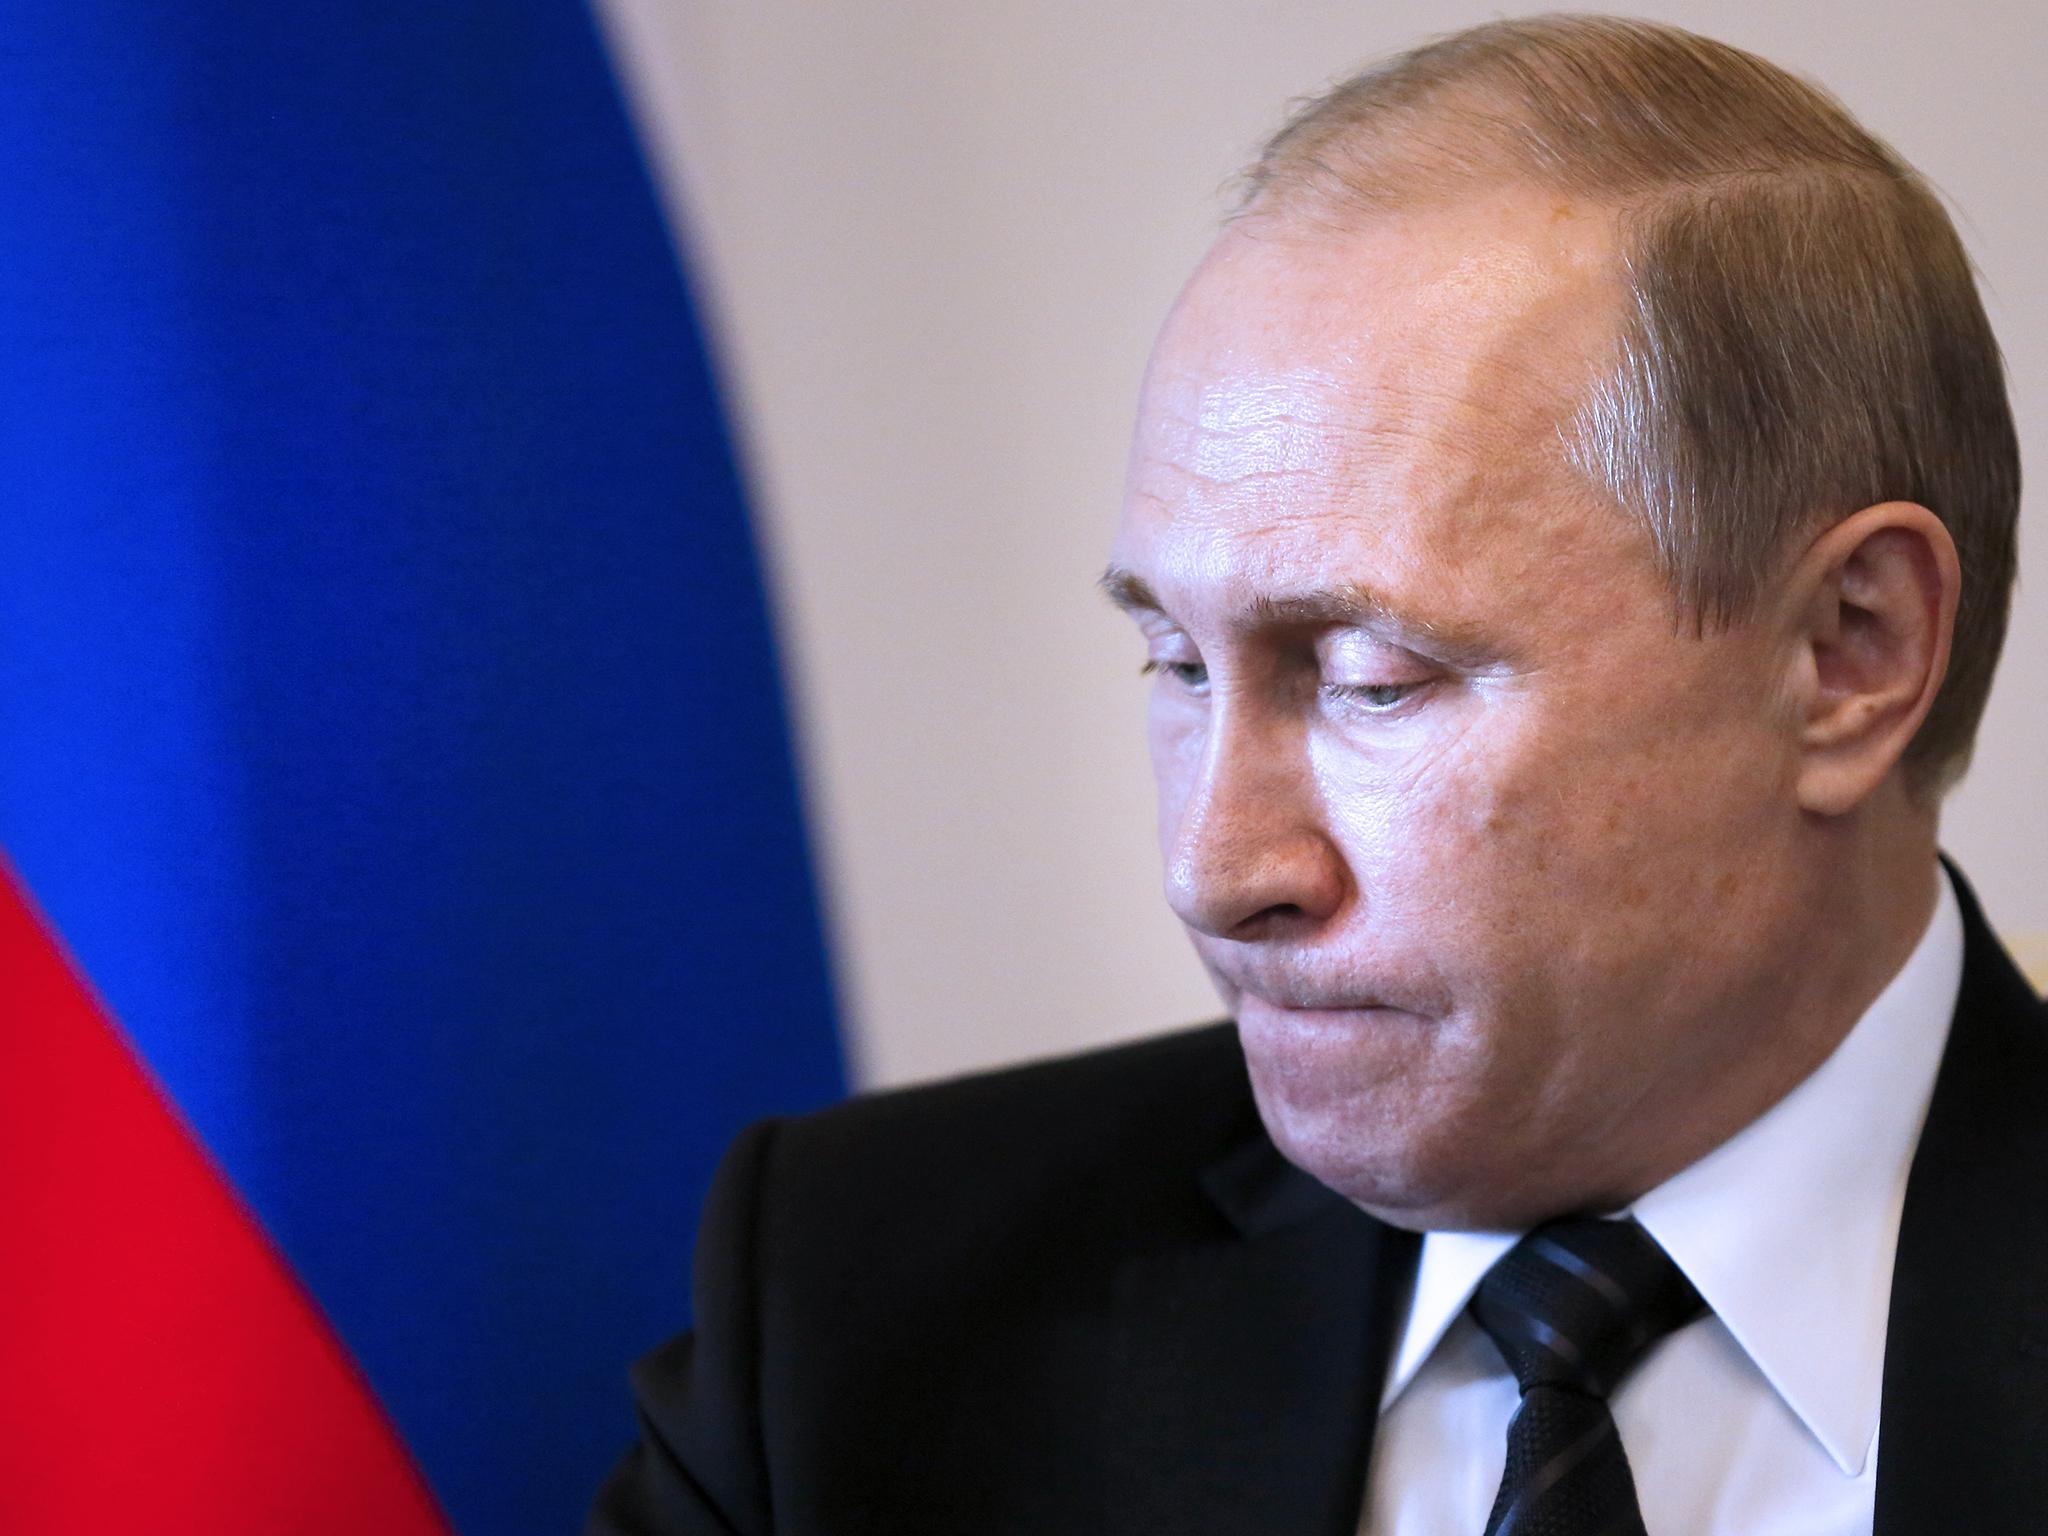 The Russian President also questioned why David Cameron called the referendum in the first place